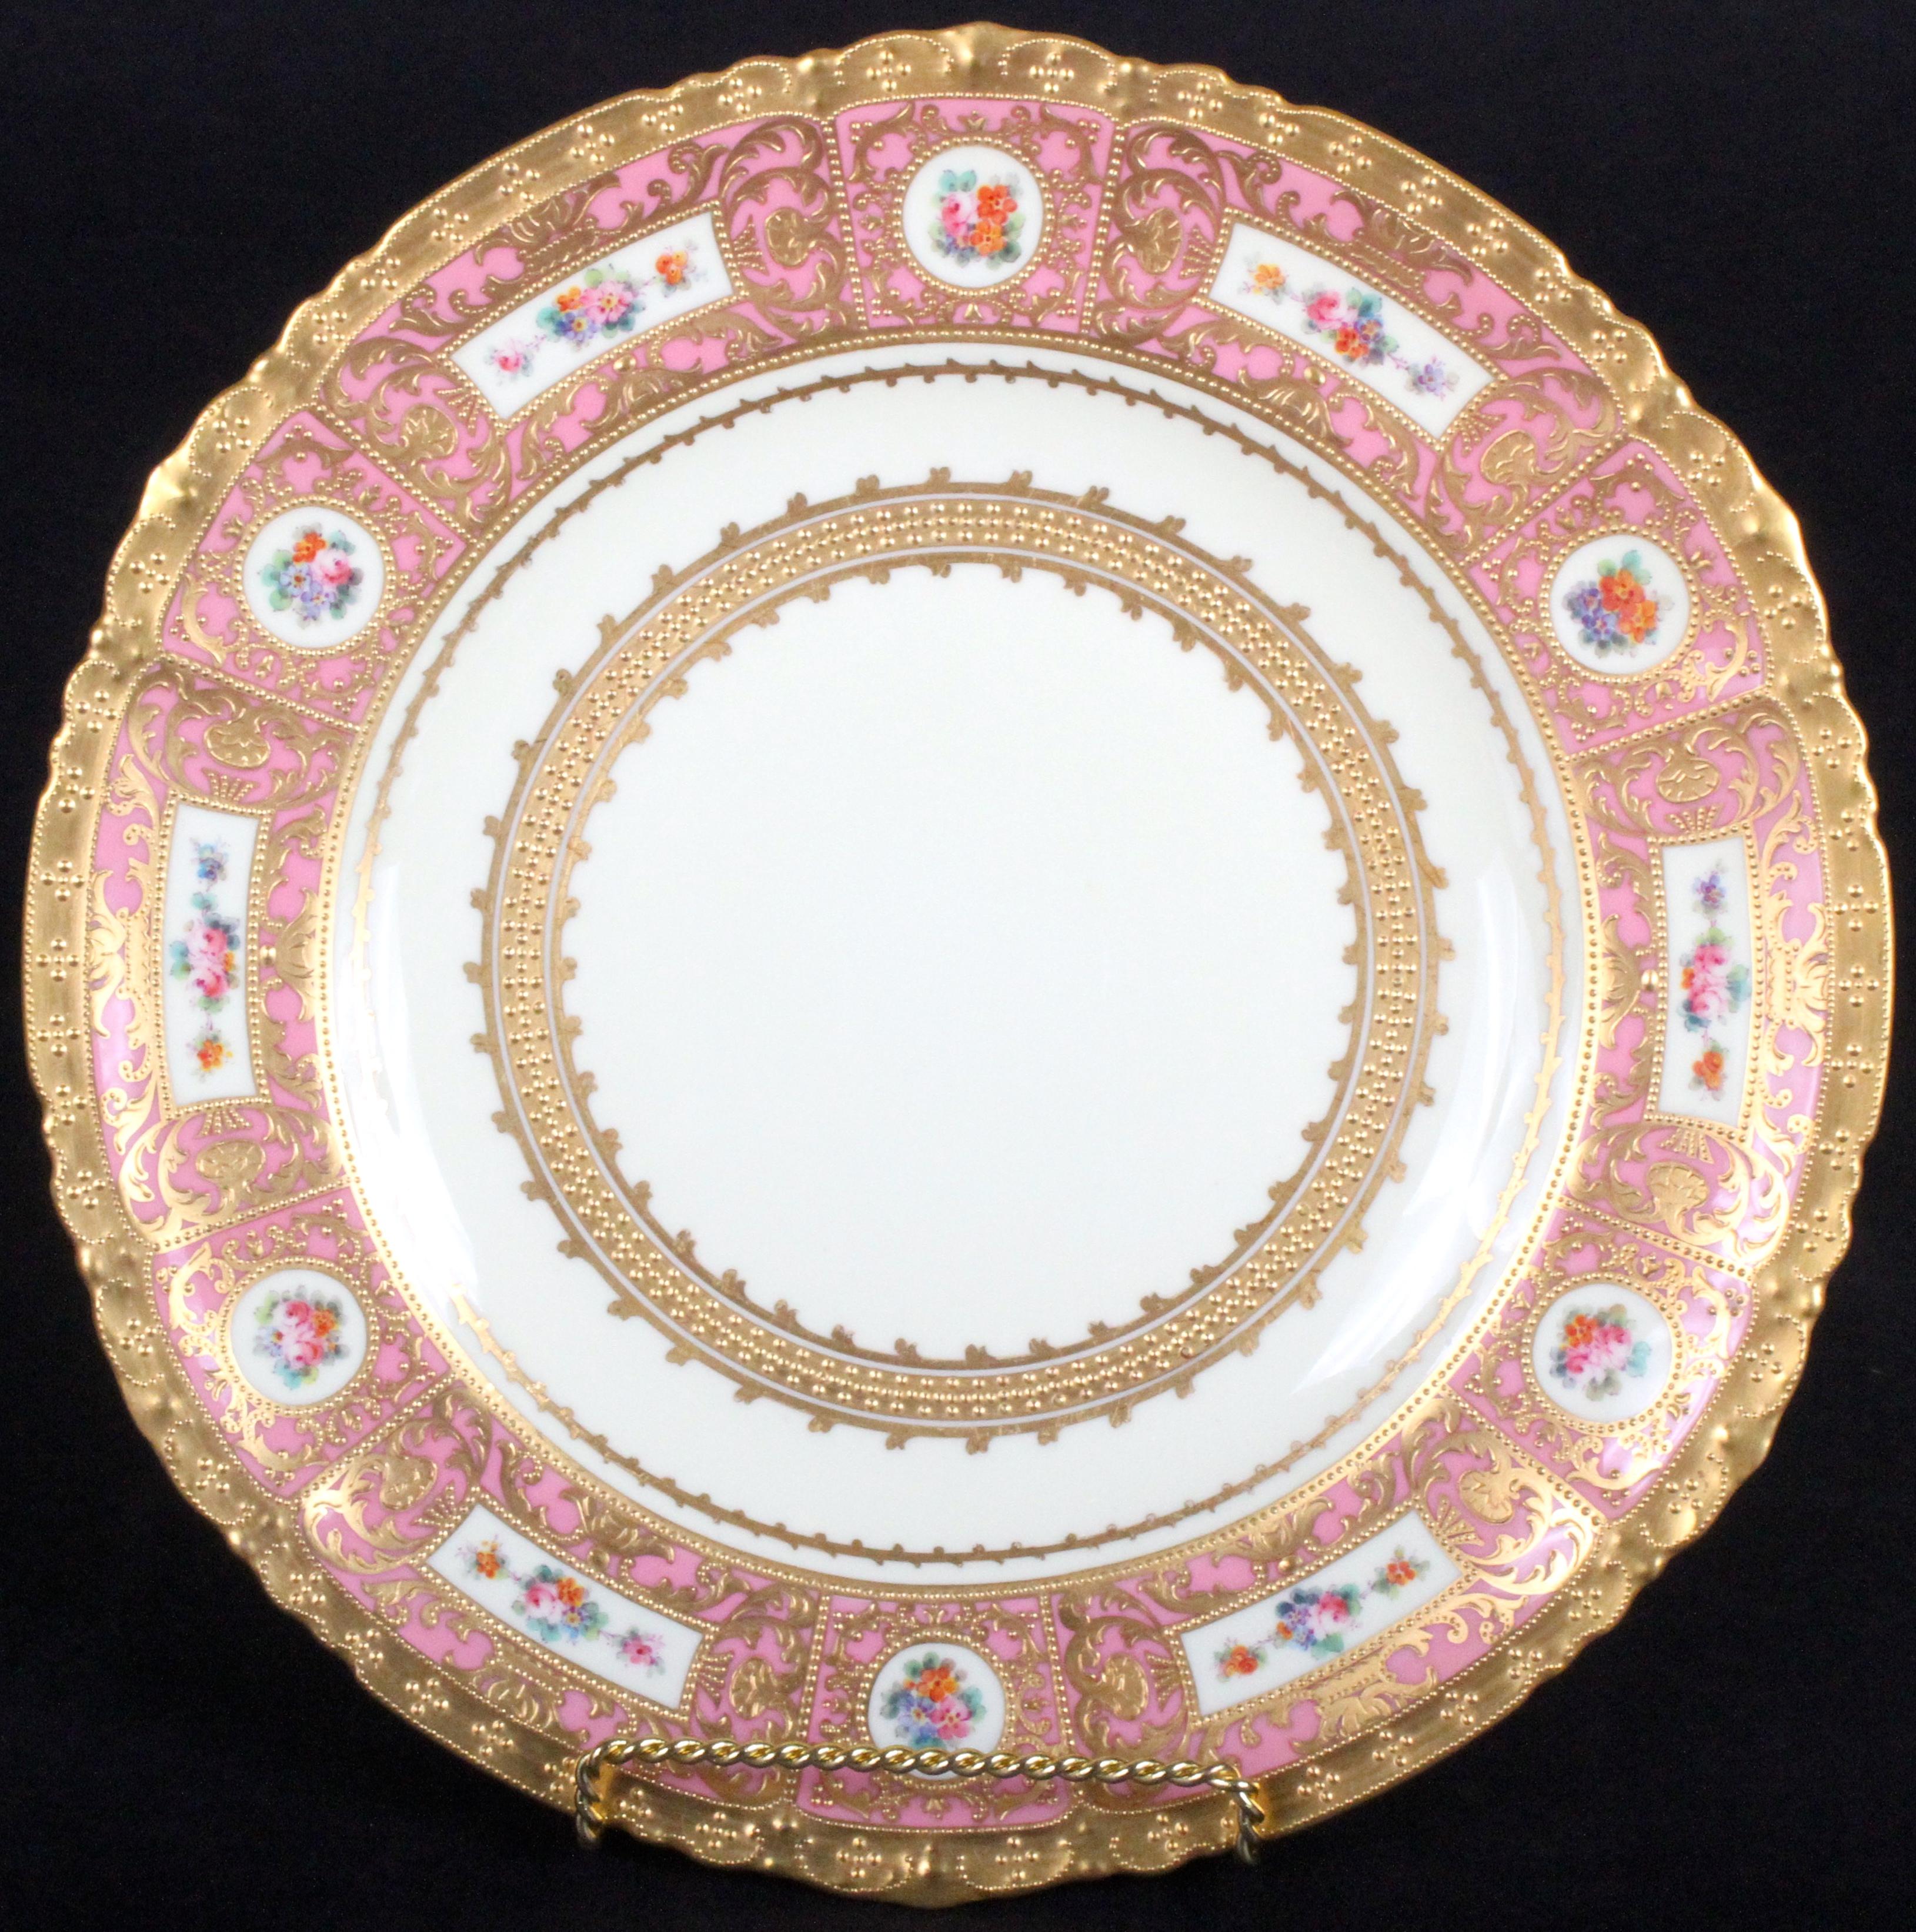 11 Derby for Tiffany Hand Painted and Gilded Pink Service Plates (Englisch) im Angebot